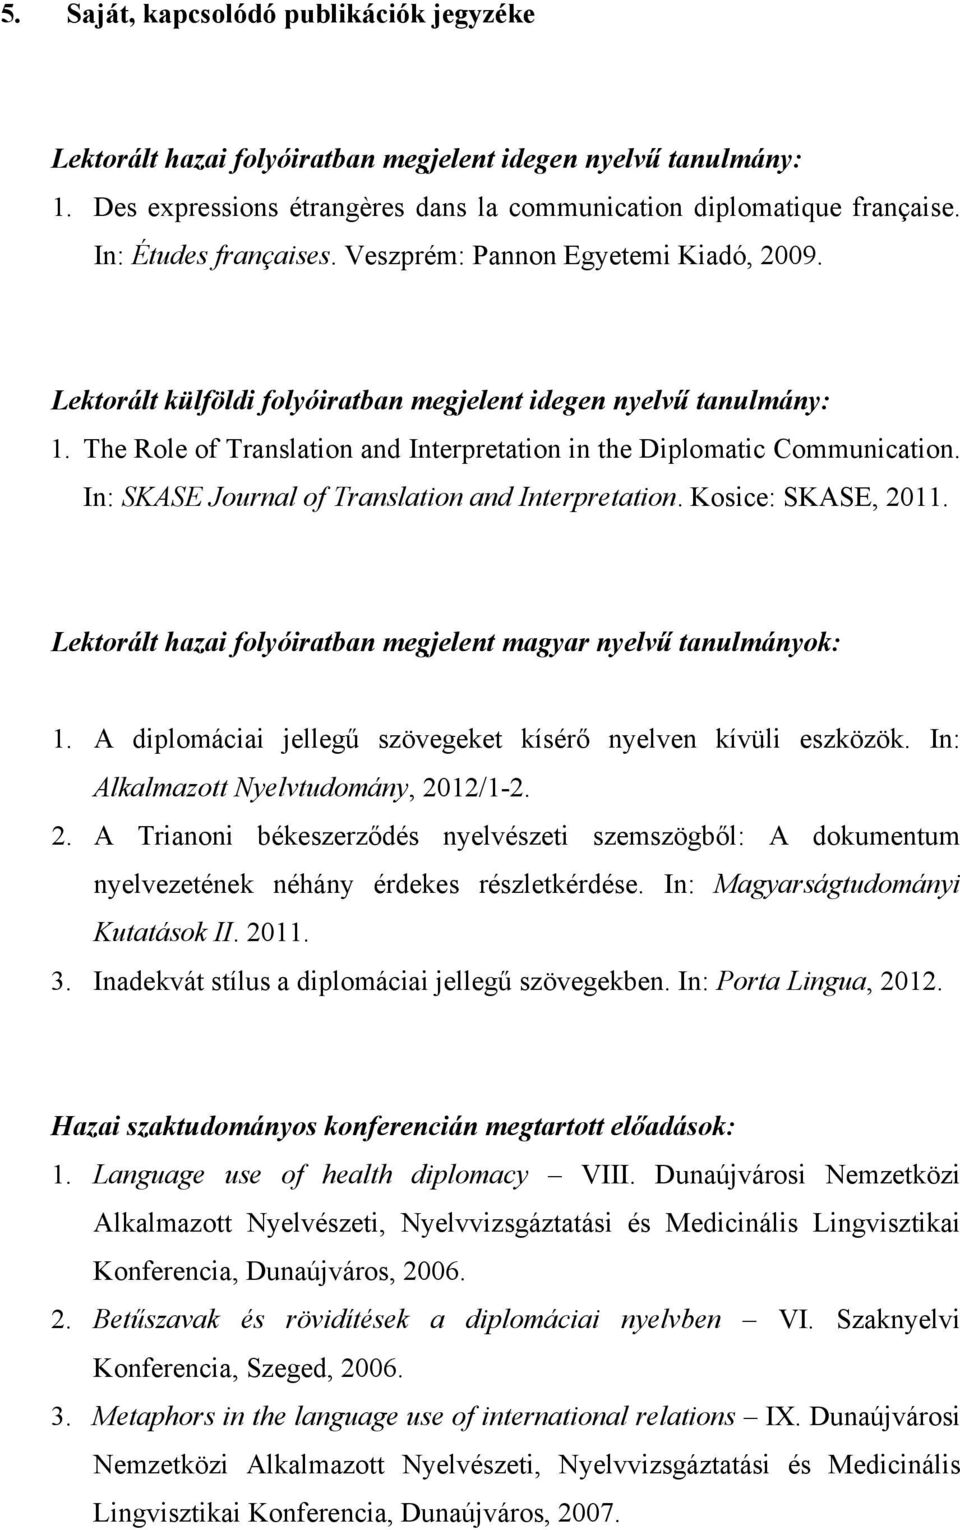 The Role of Translation and Interpretation in the Diplomatic Communication. In: SKASE Journal of Translation and Interpretation. Kosice: SKASE, 2011.